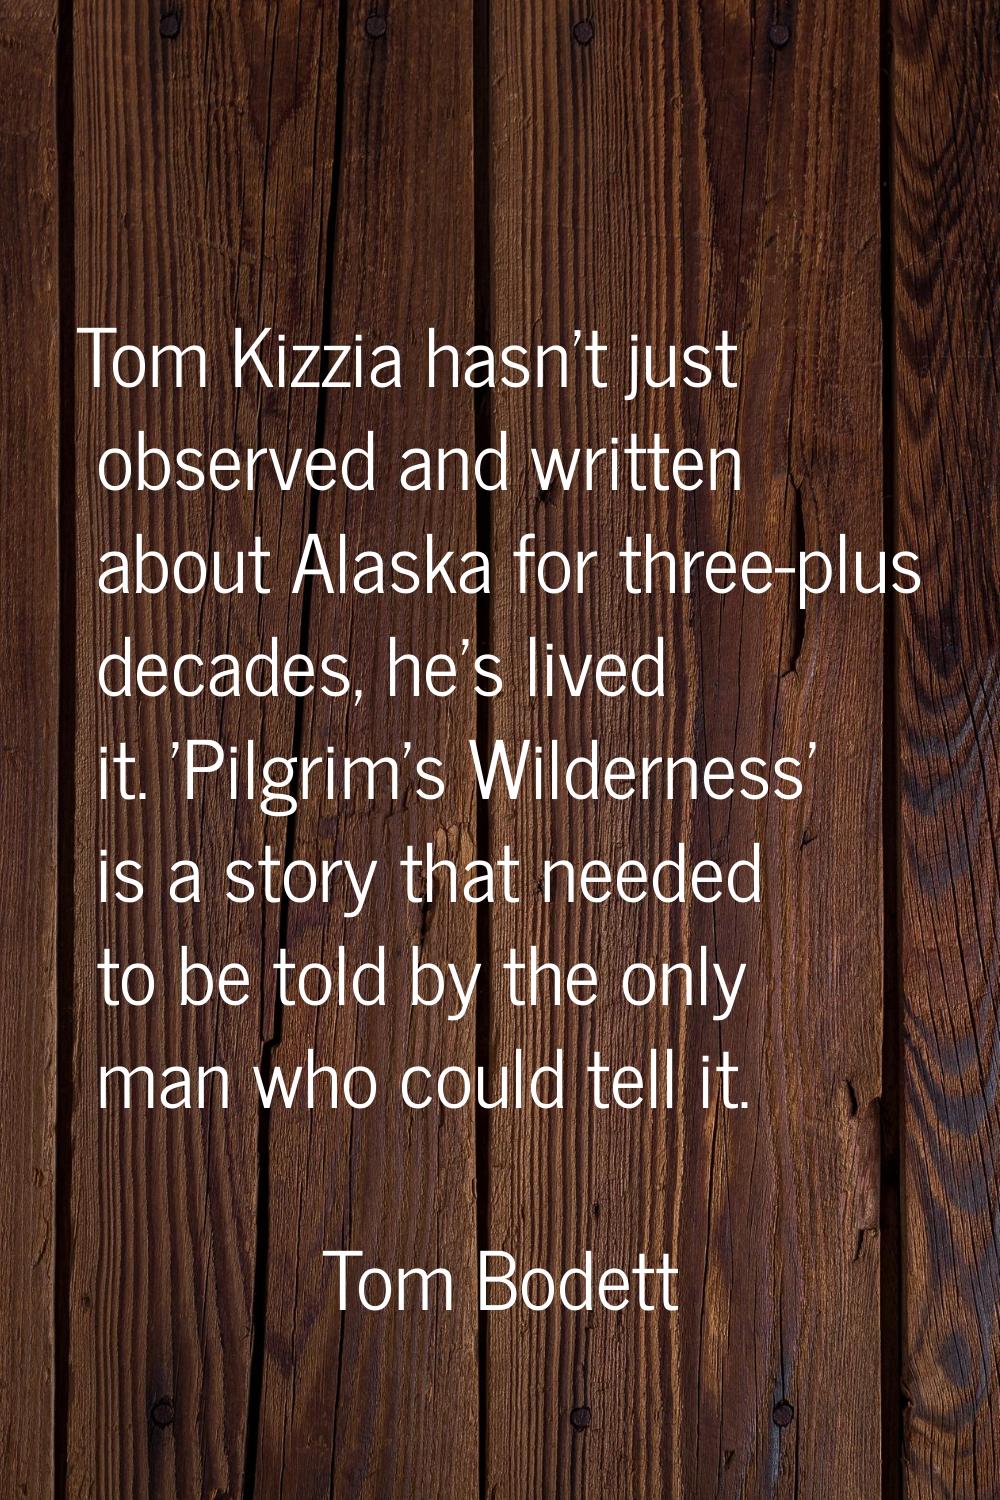 Tom Kizzia hasn't just observed and written about Alaska for three-plus decades, he's lived it. 'Pi